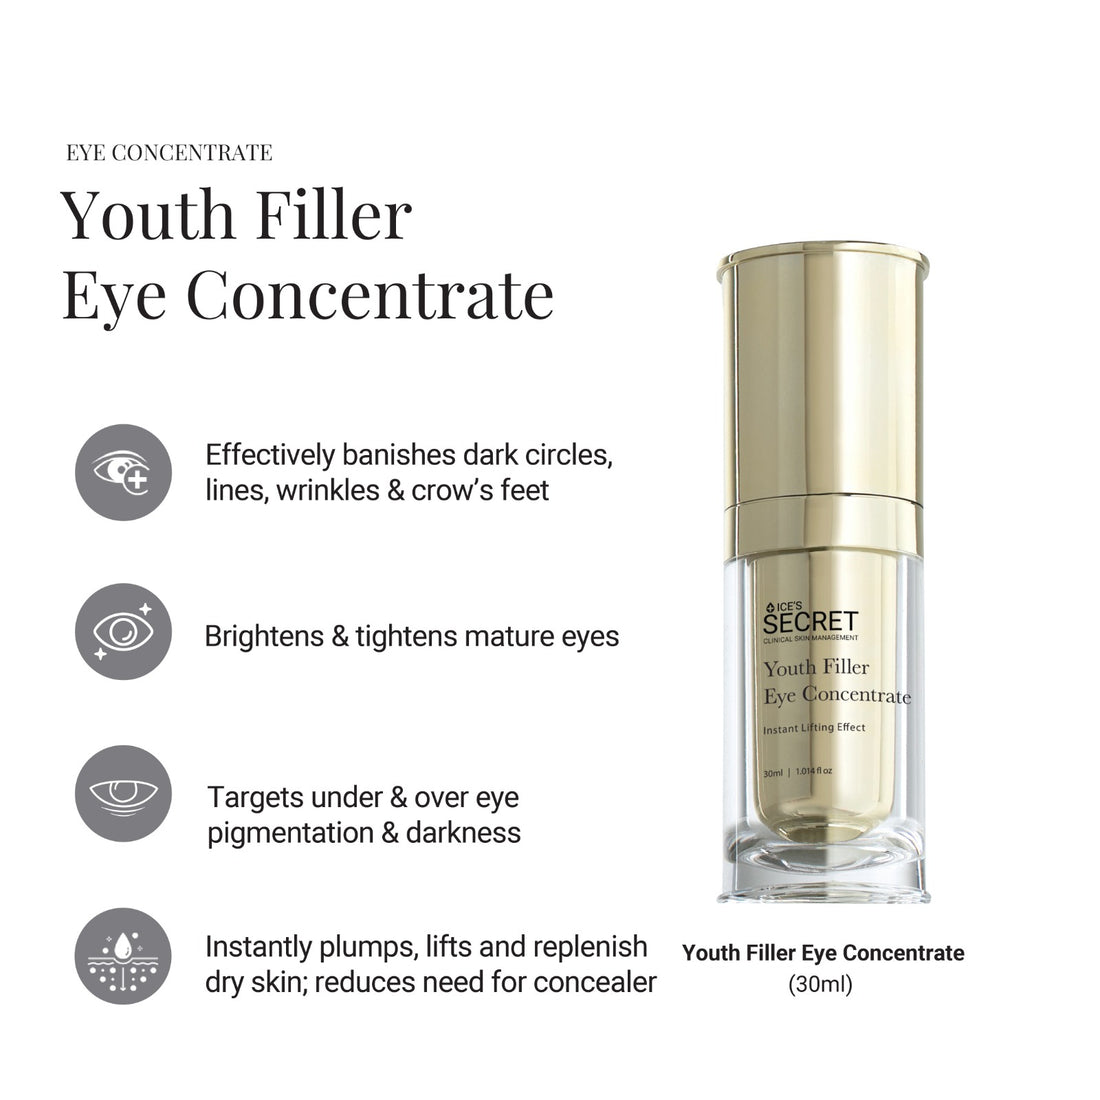 Youth Filler Eye Concentrate